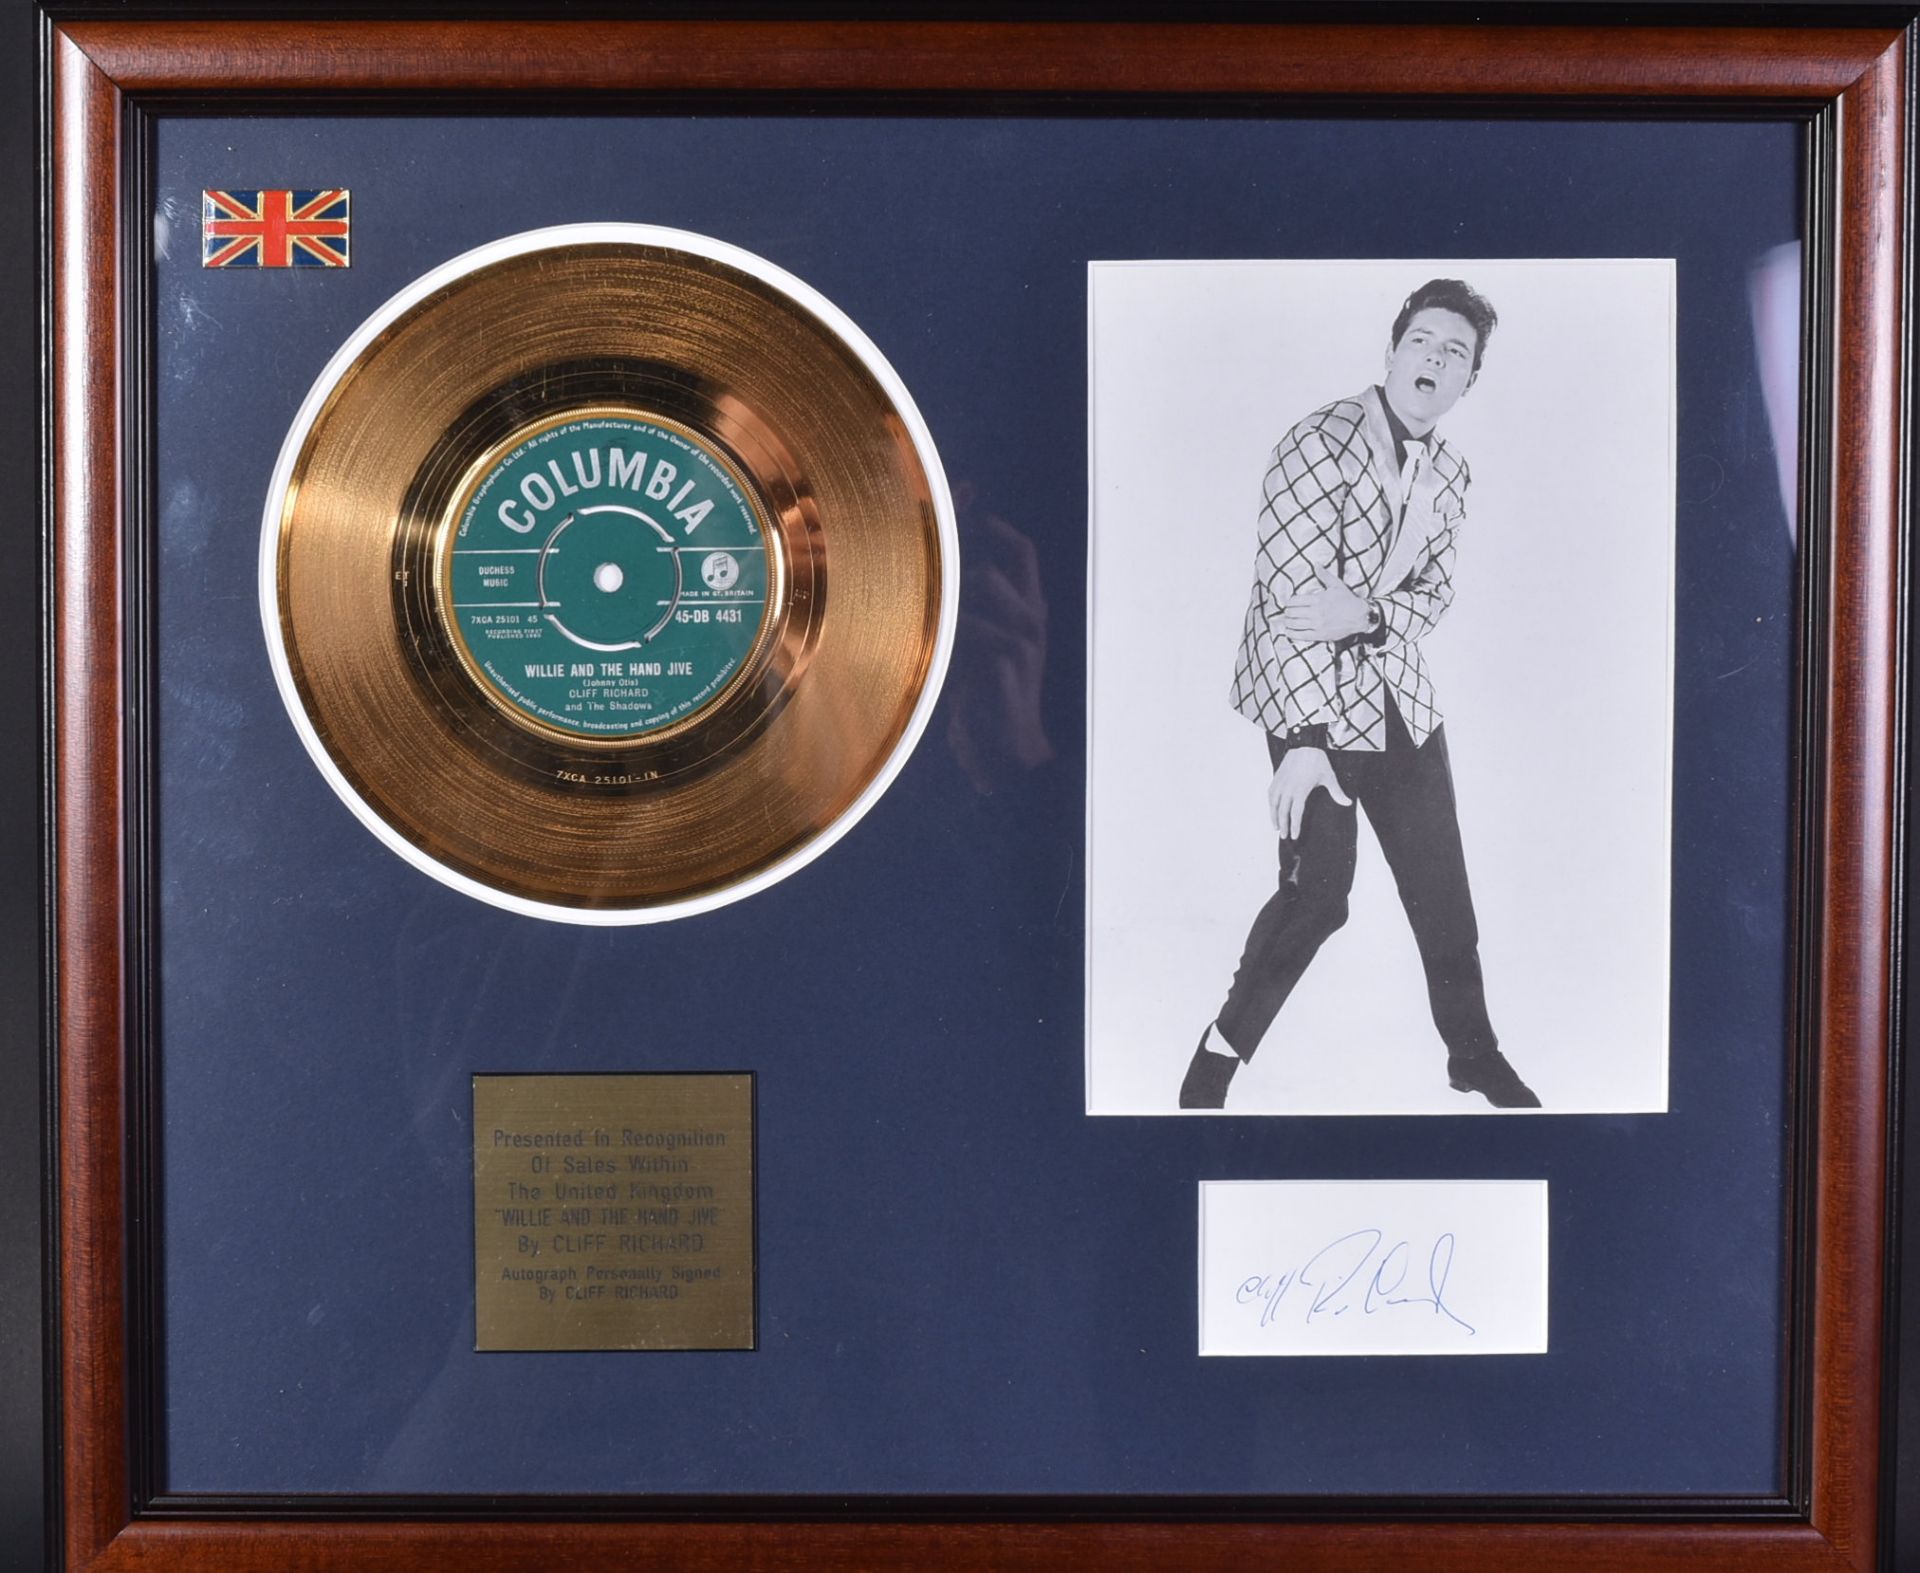 CLIFF RICHARD - PRESENTATION GOLD DISC WITH AUTOGRAPH